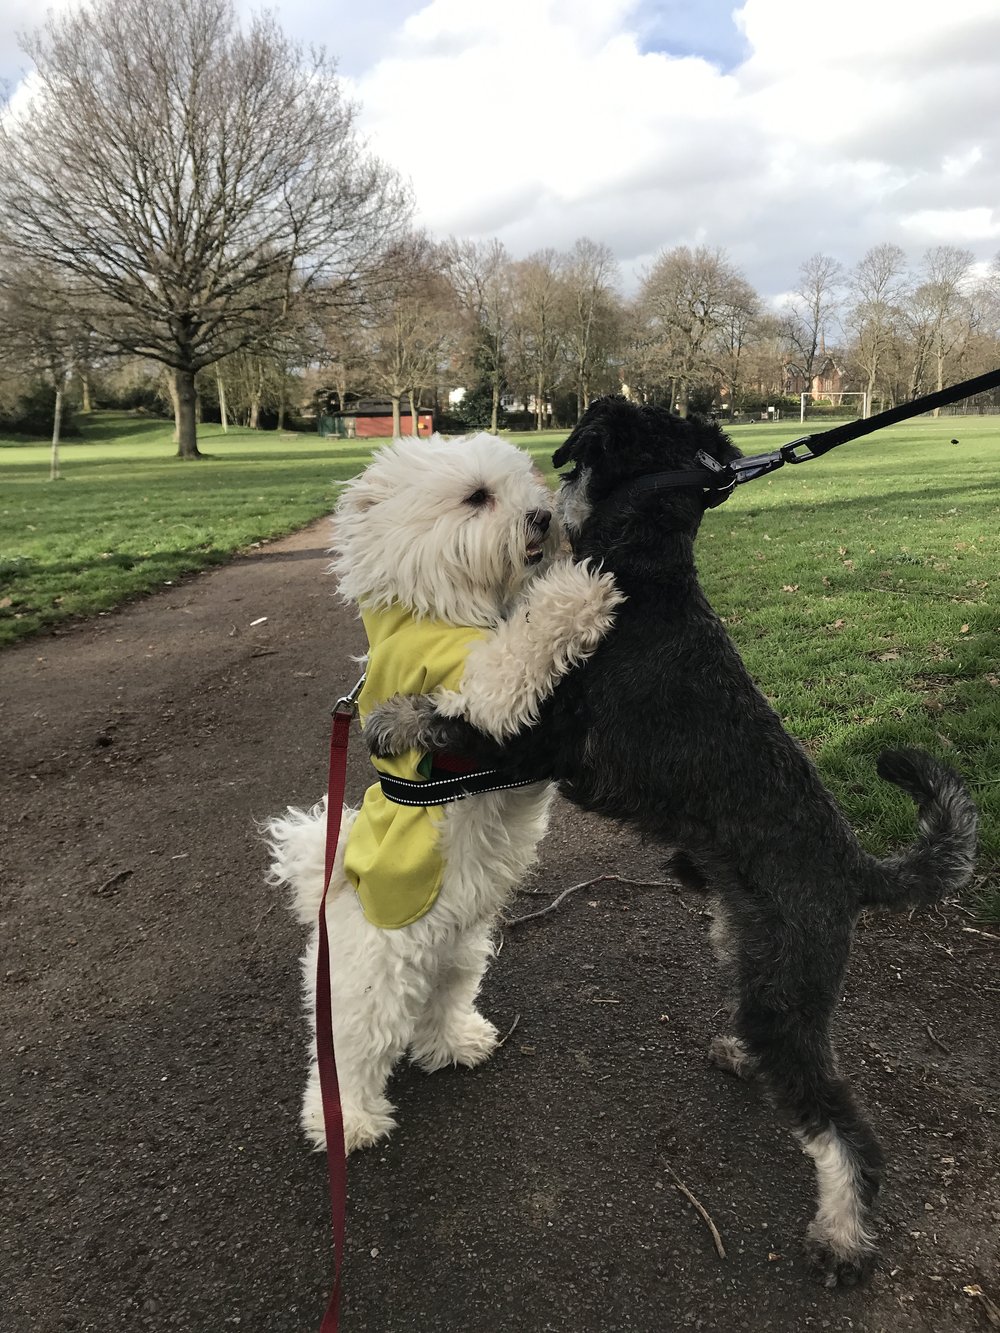 Hurley's first friend in the park 💛 